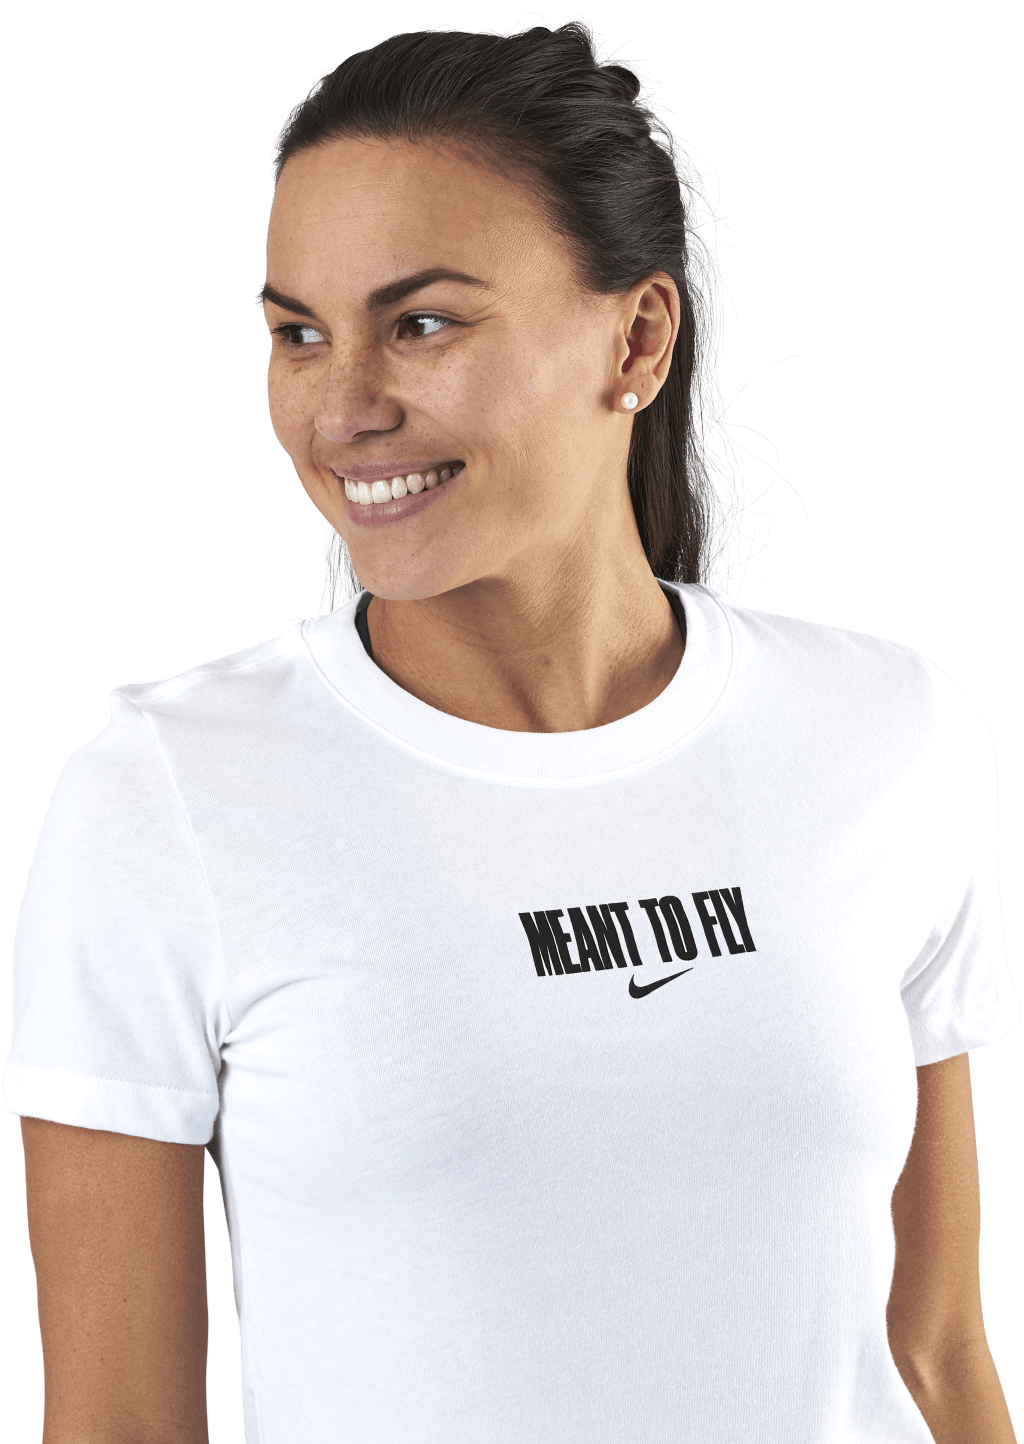 Womens Dri-Fit Tee - Meant To Fly White